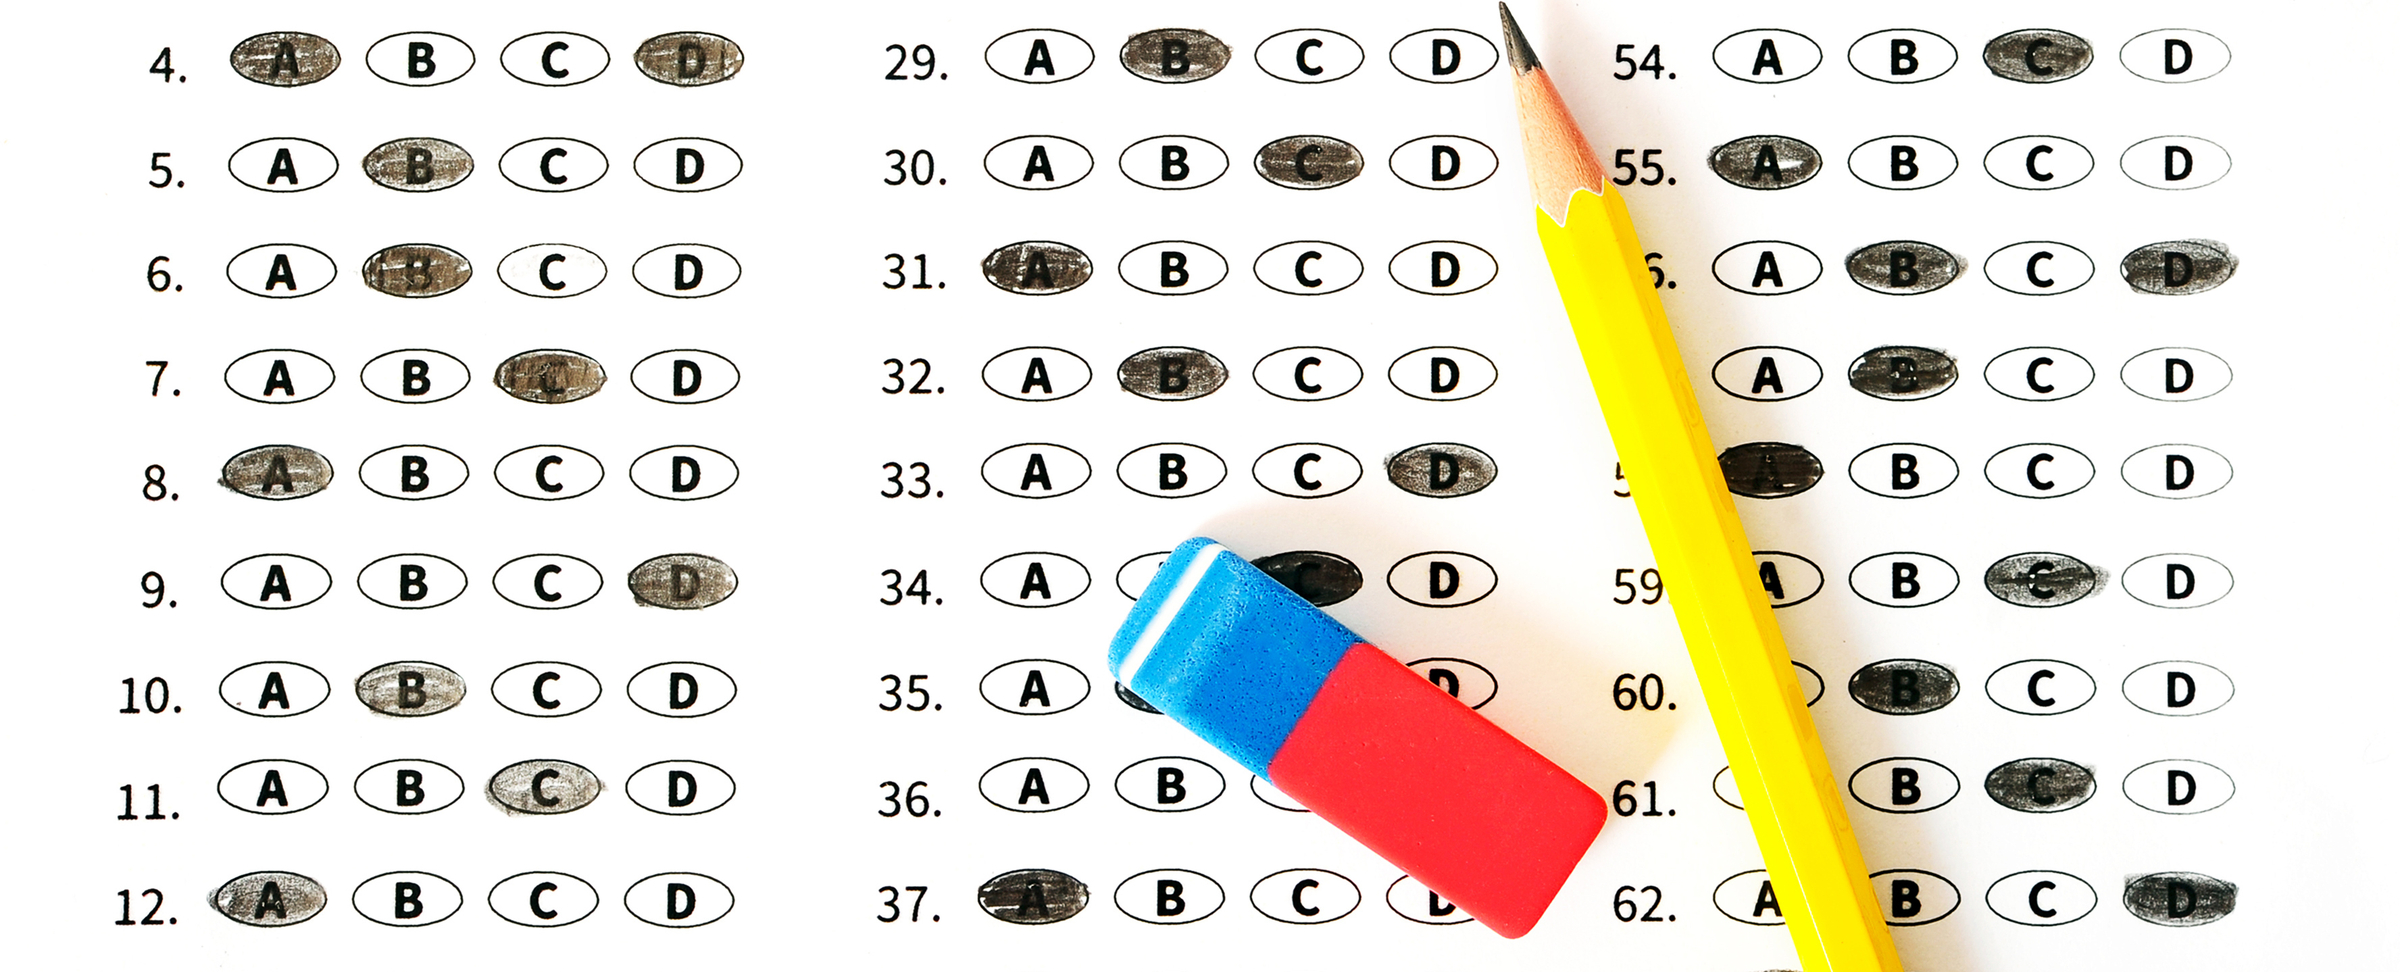 college board test 5 answers